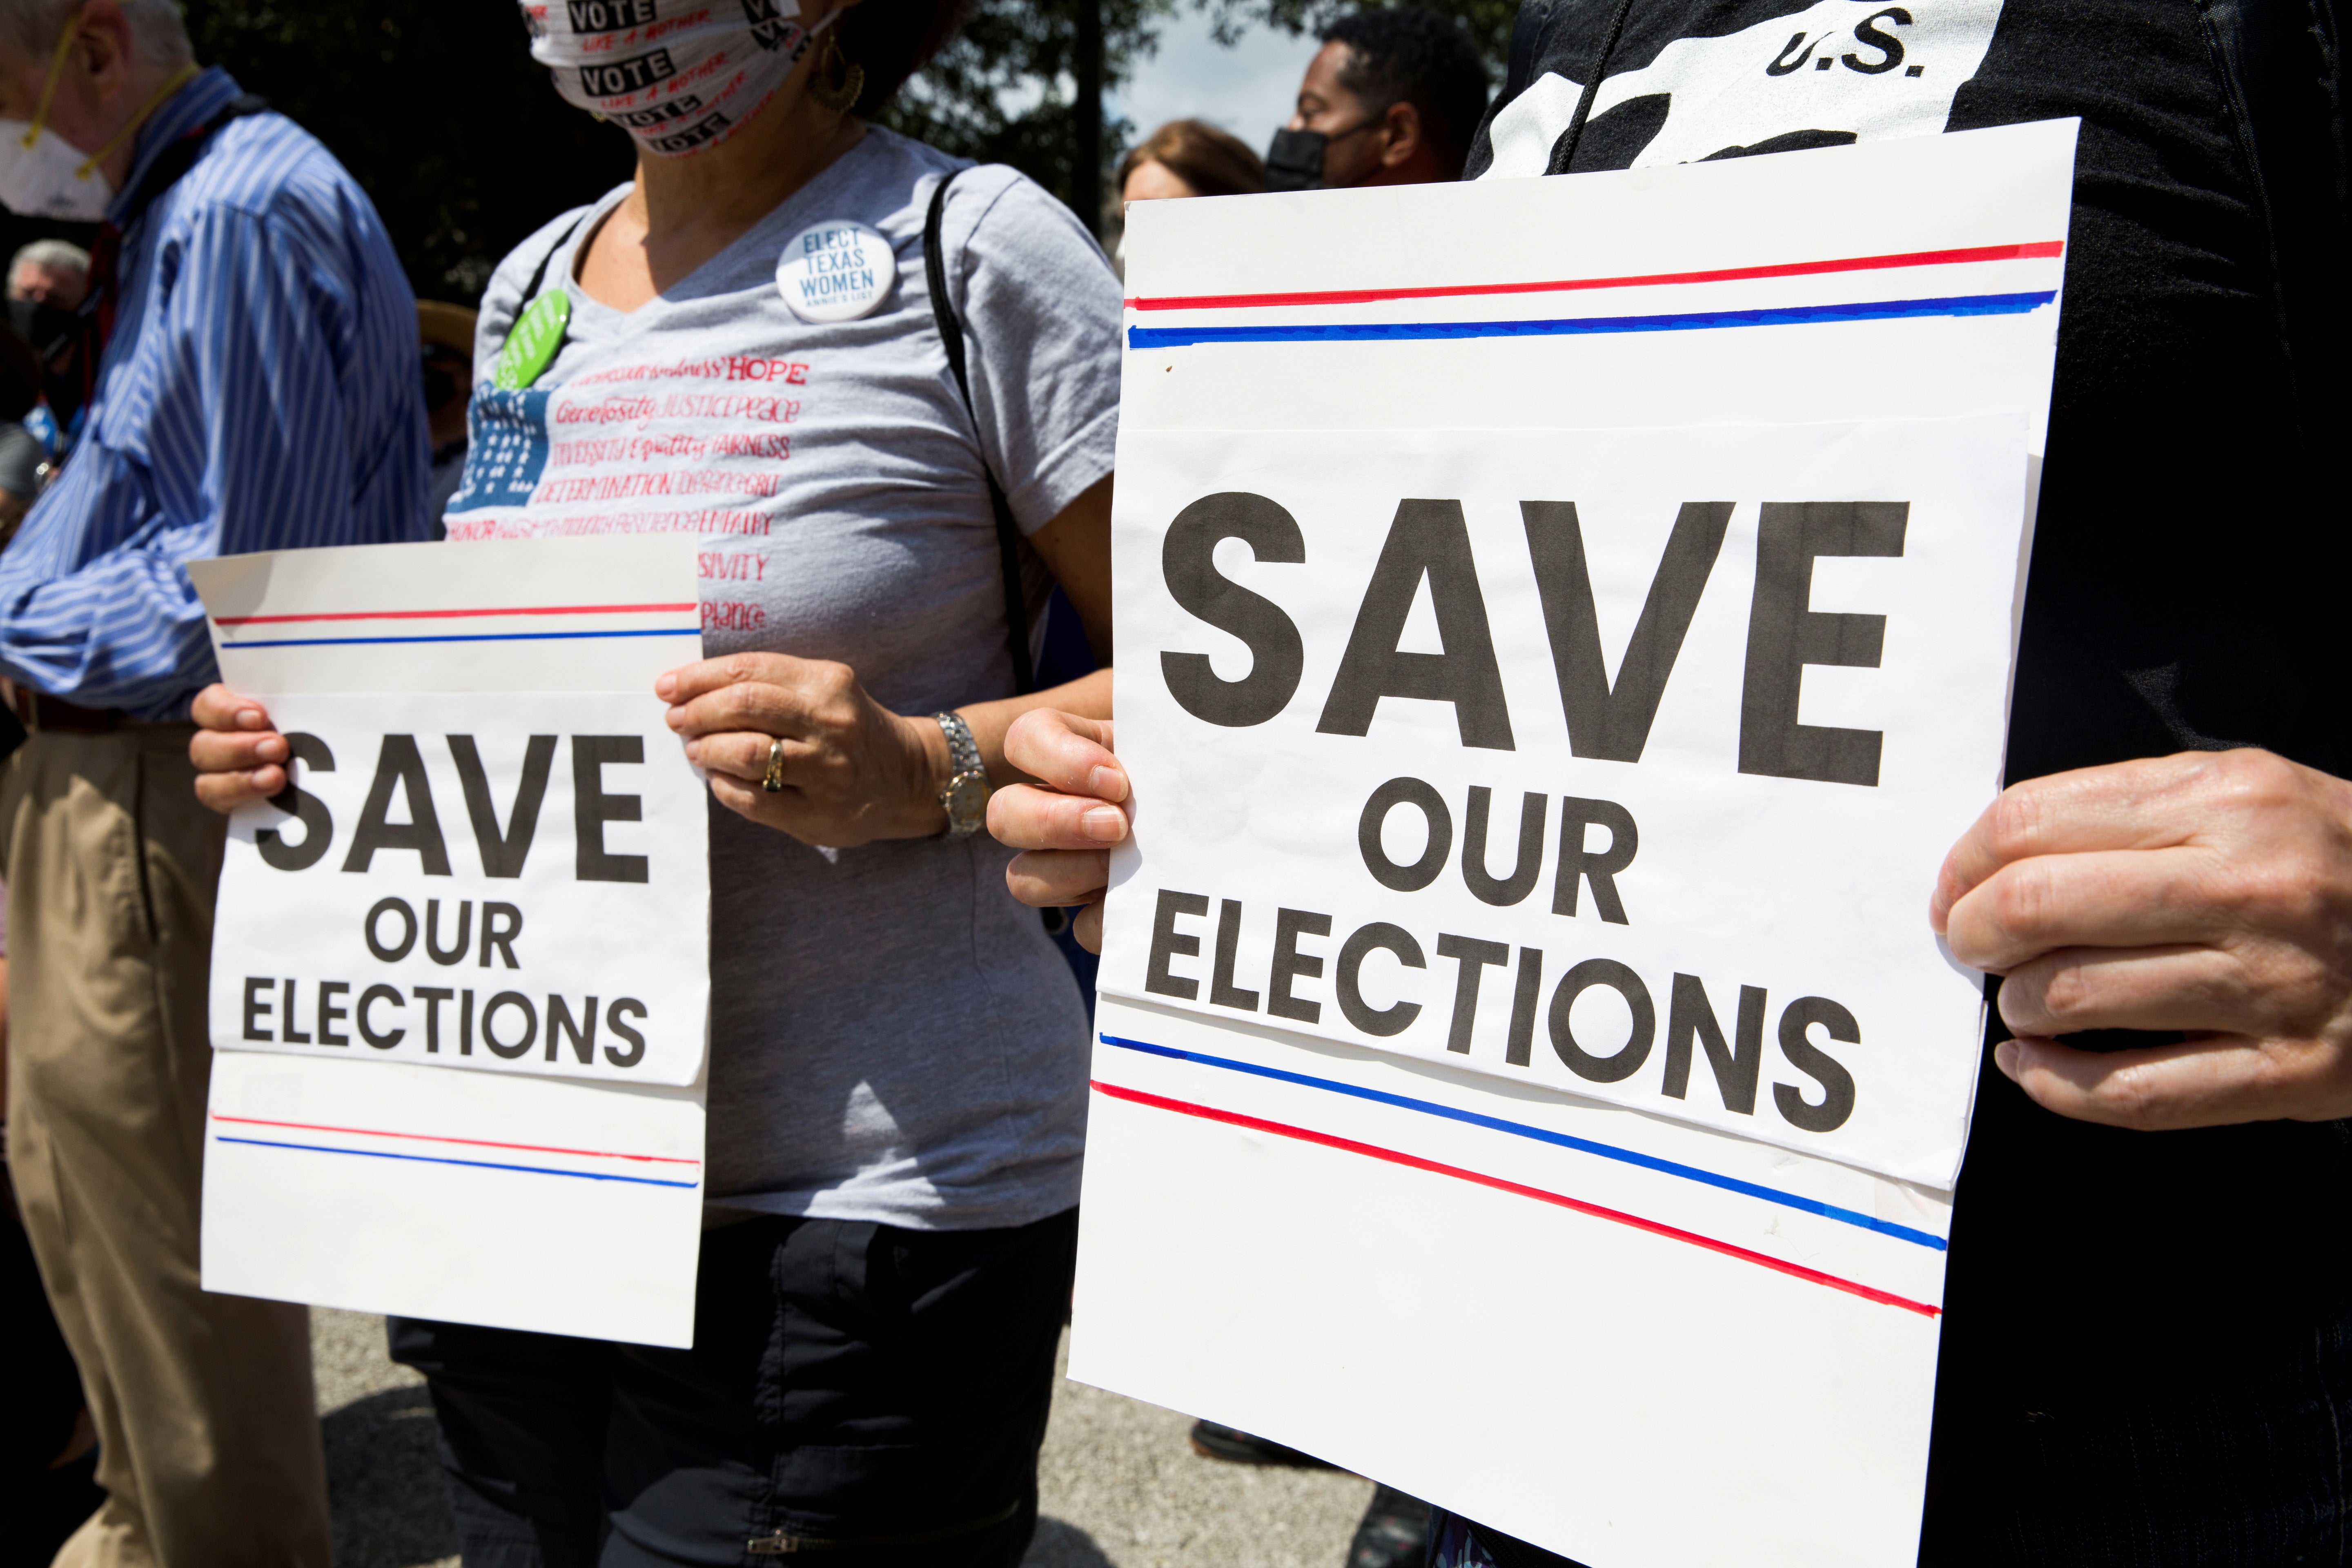 Two people hold up signs that say "Save Our Elections."